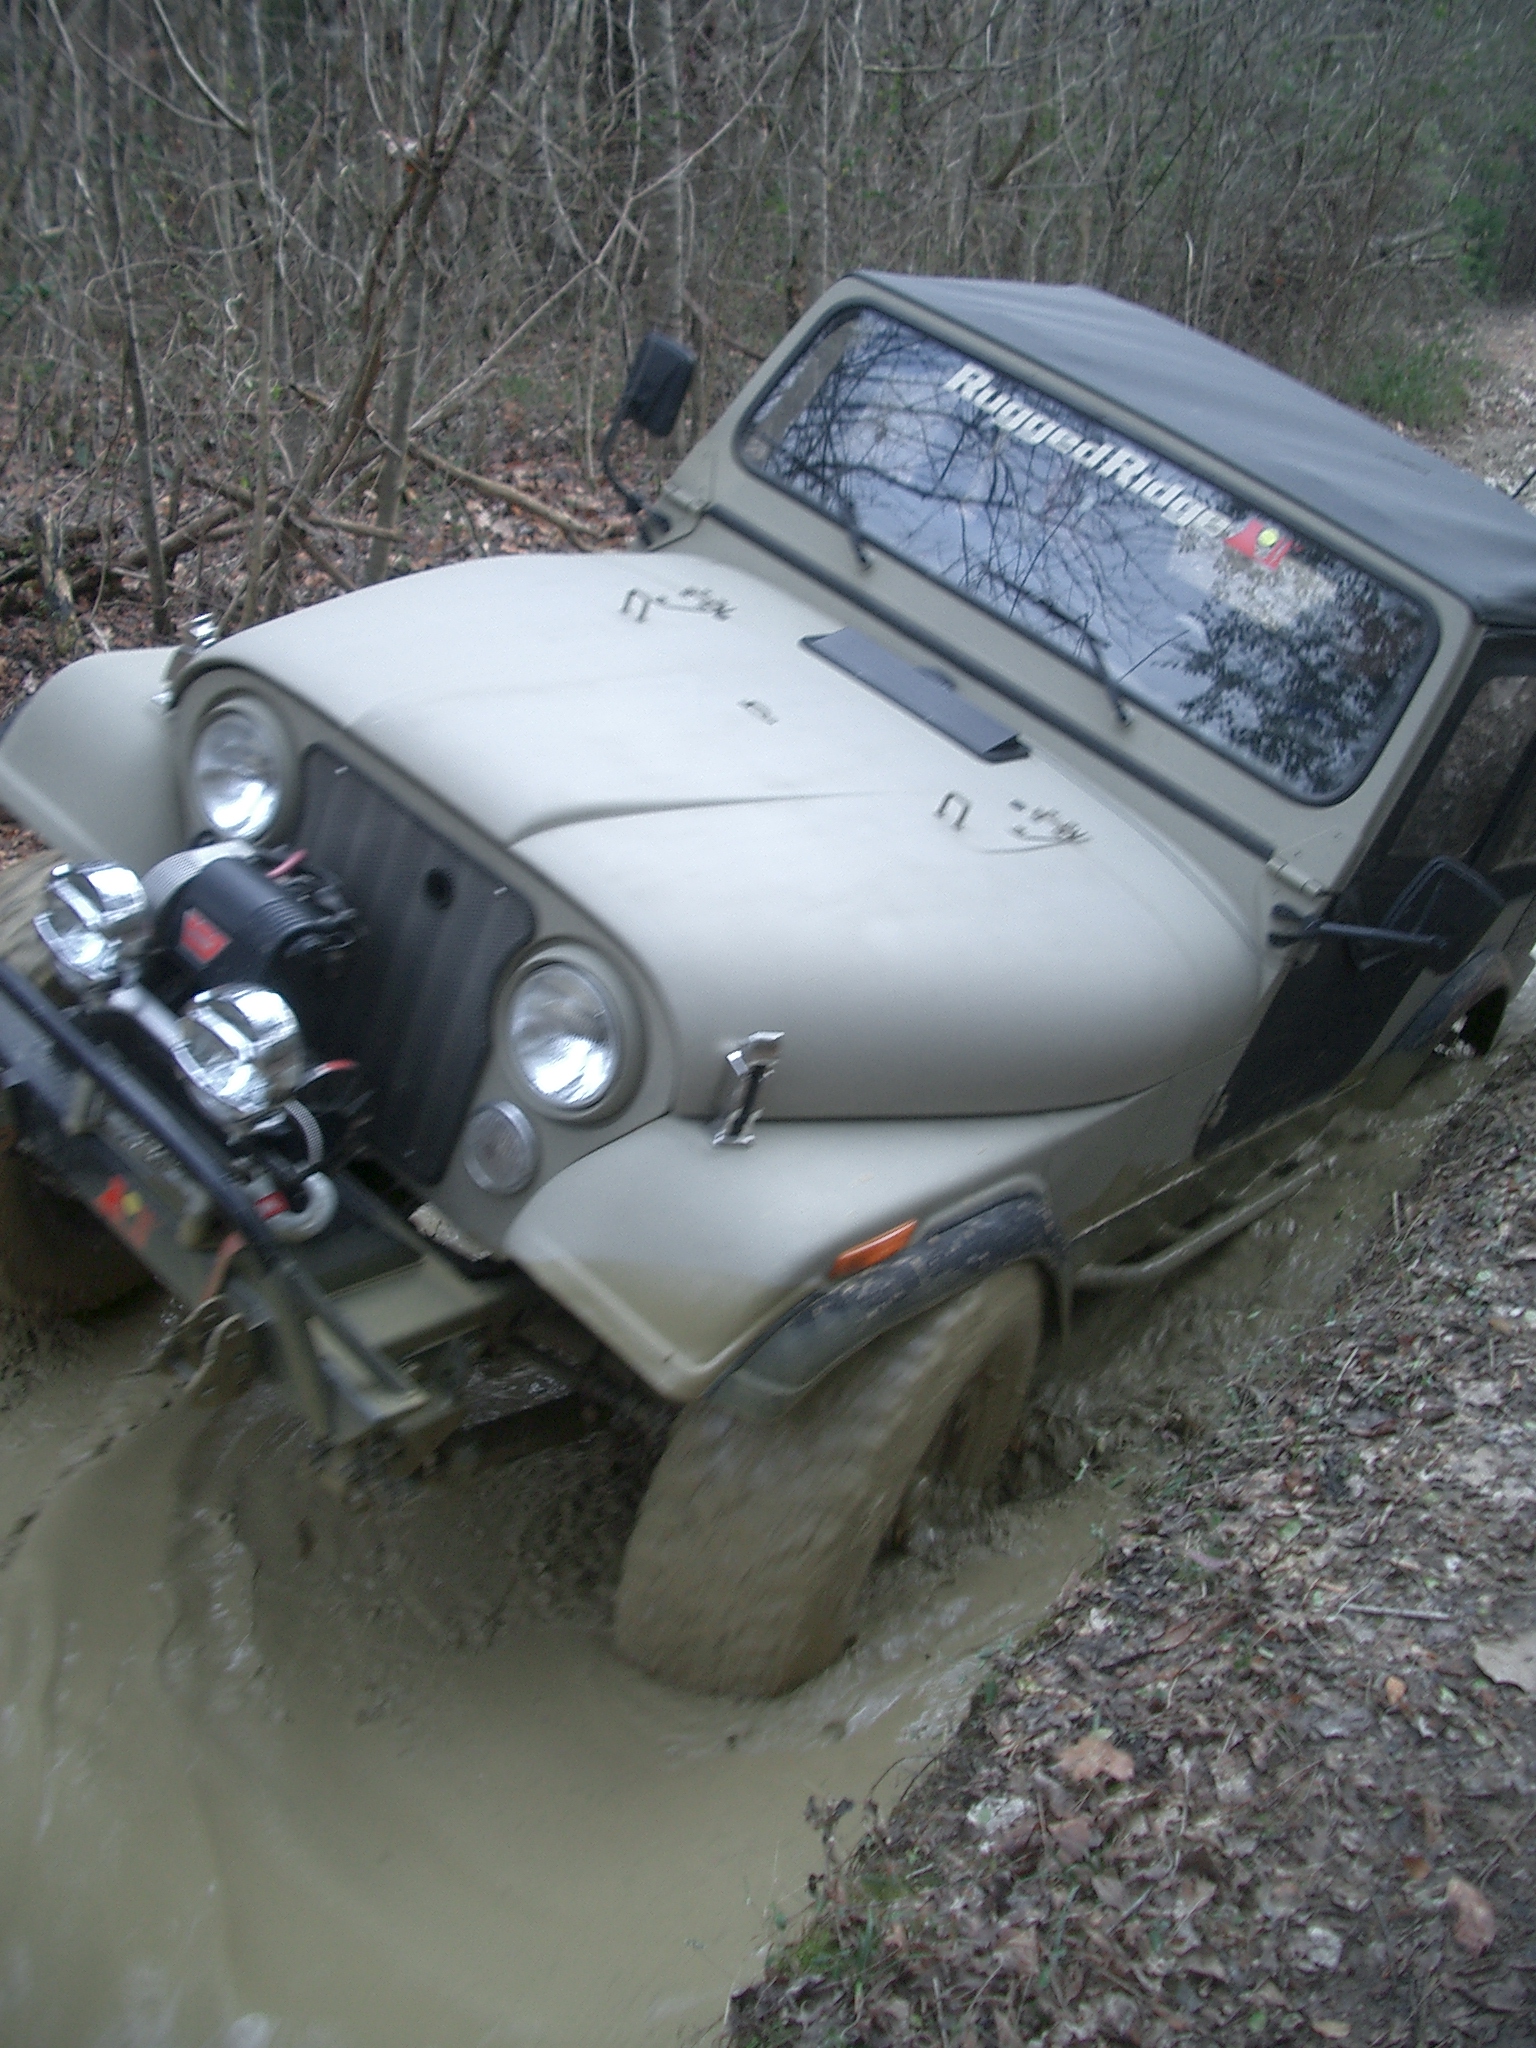 Pat in the Mud hole